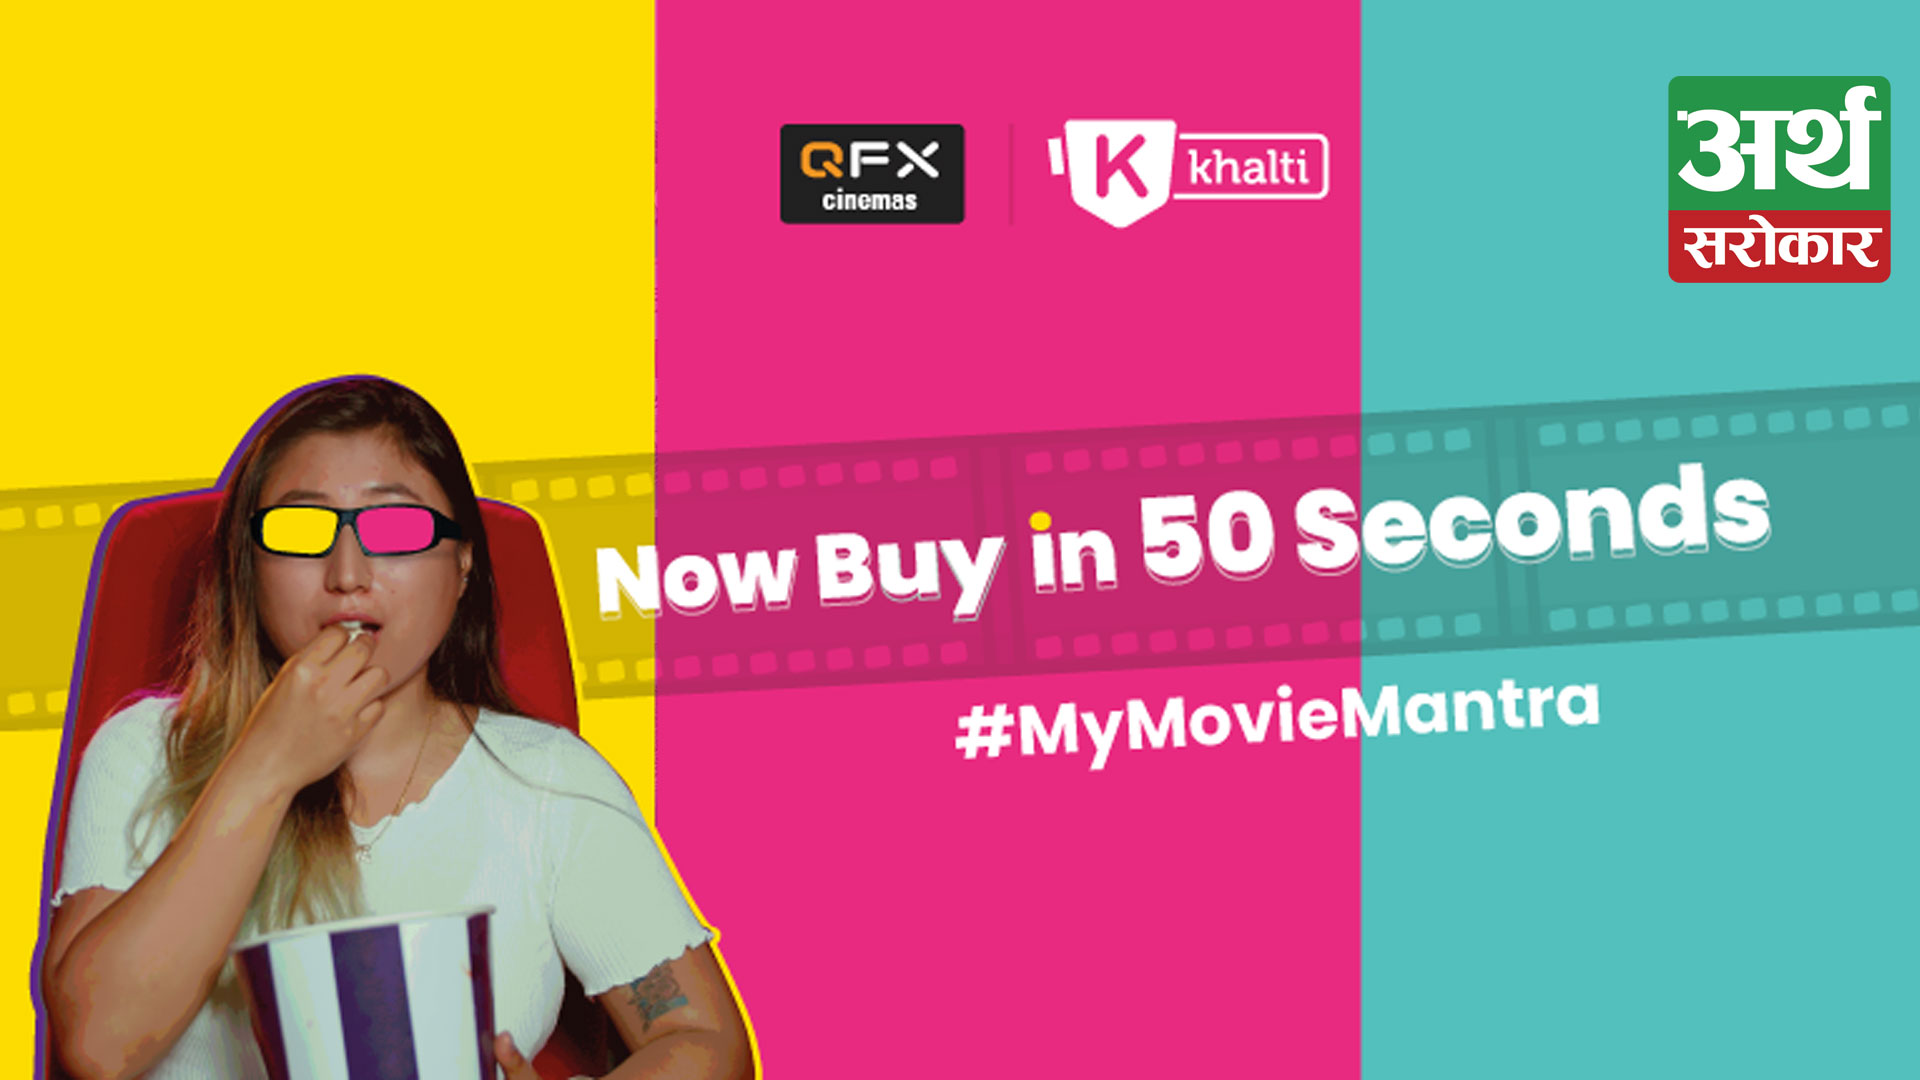 Buy QFX Movie tickets in 50 seconds from Khalti app